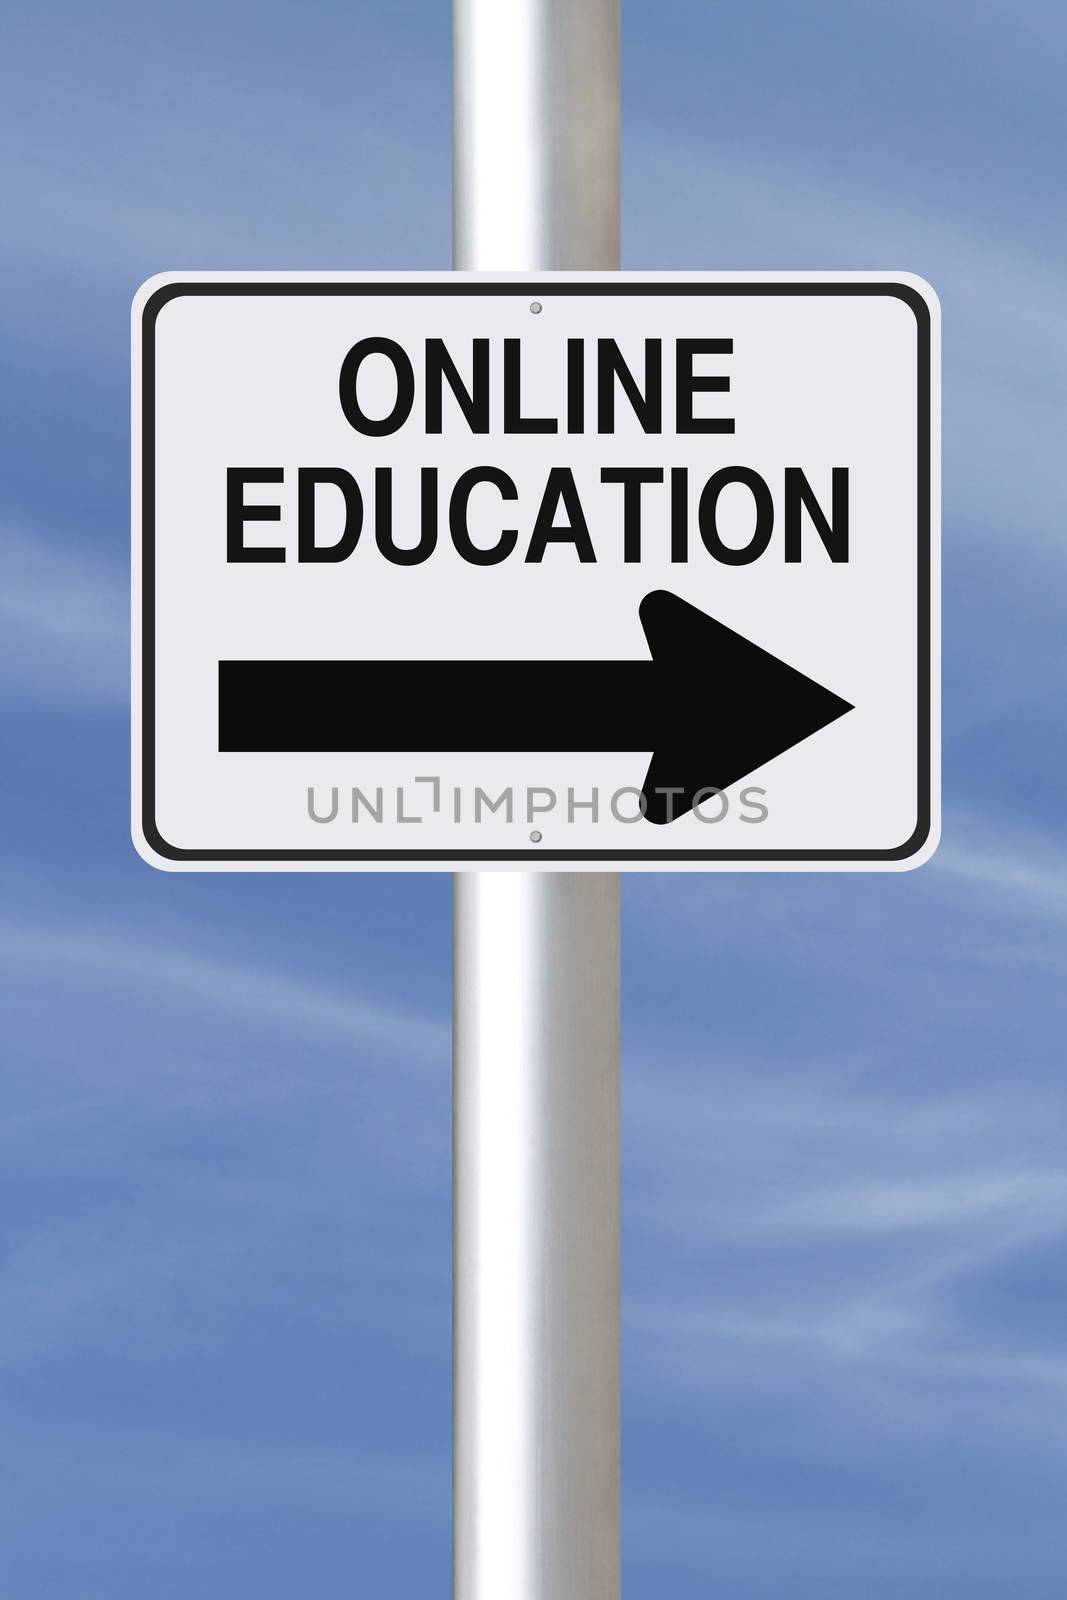 Conceptual one way road sign on online education